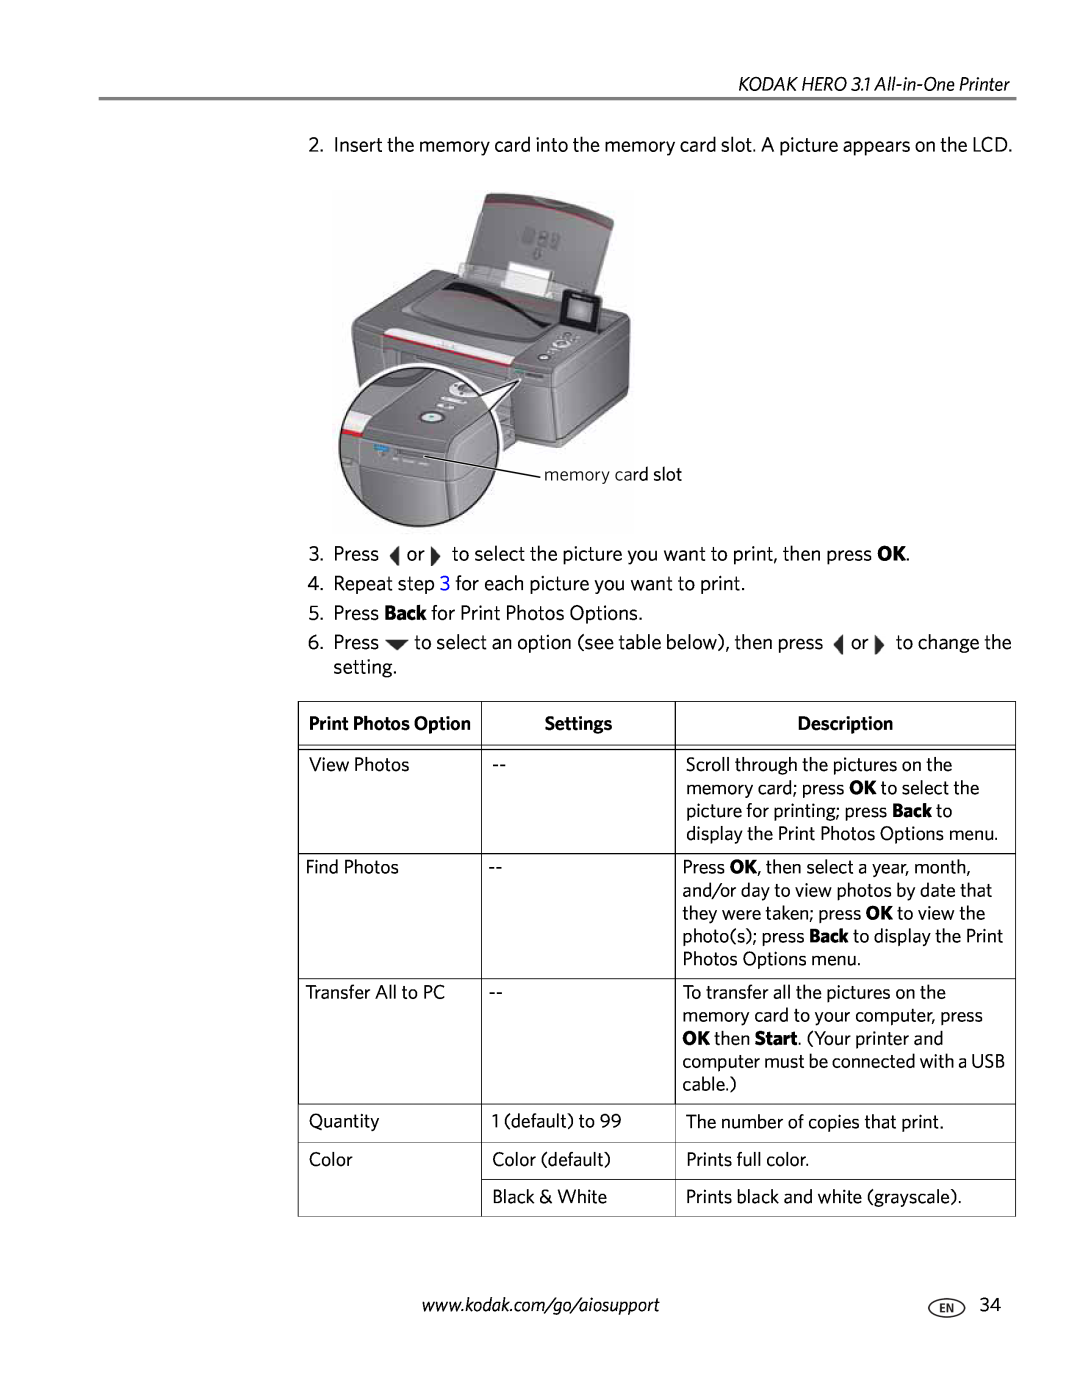 Kodak 3.1 manual Press or to select the picture you want to print, then press OK 